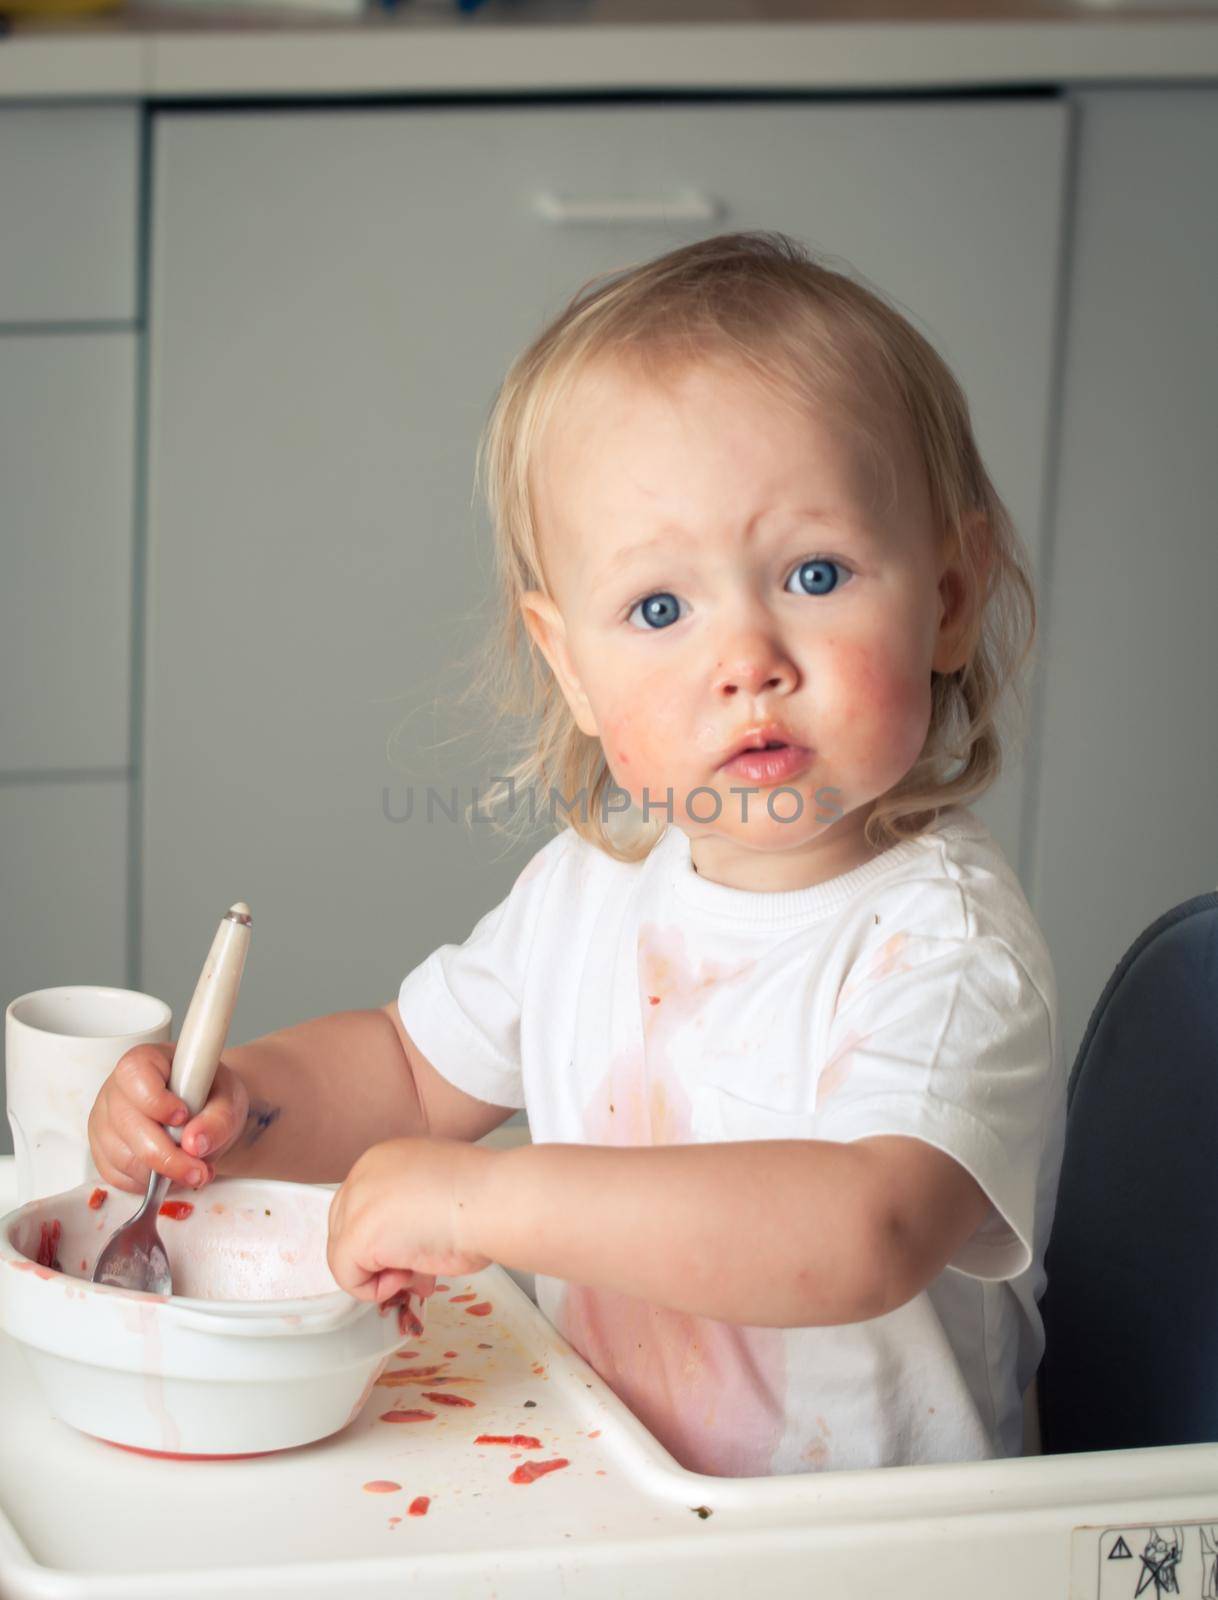 cute baby toddler learn to eat soup. High quality photo